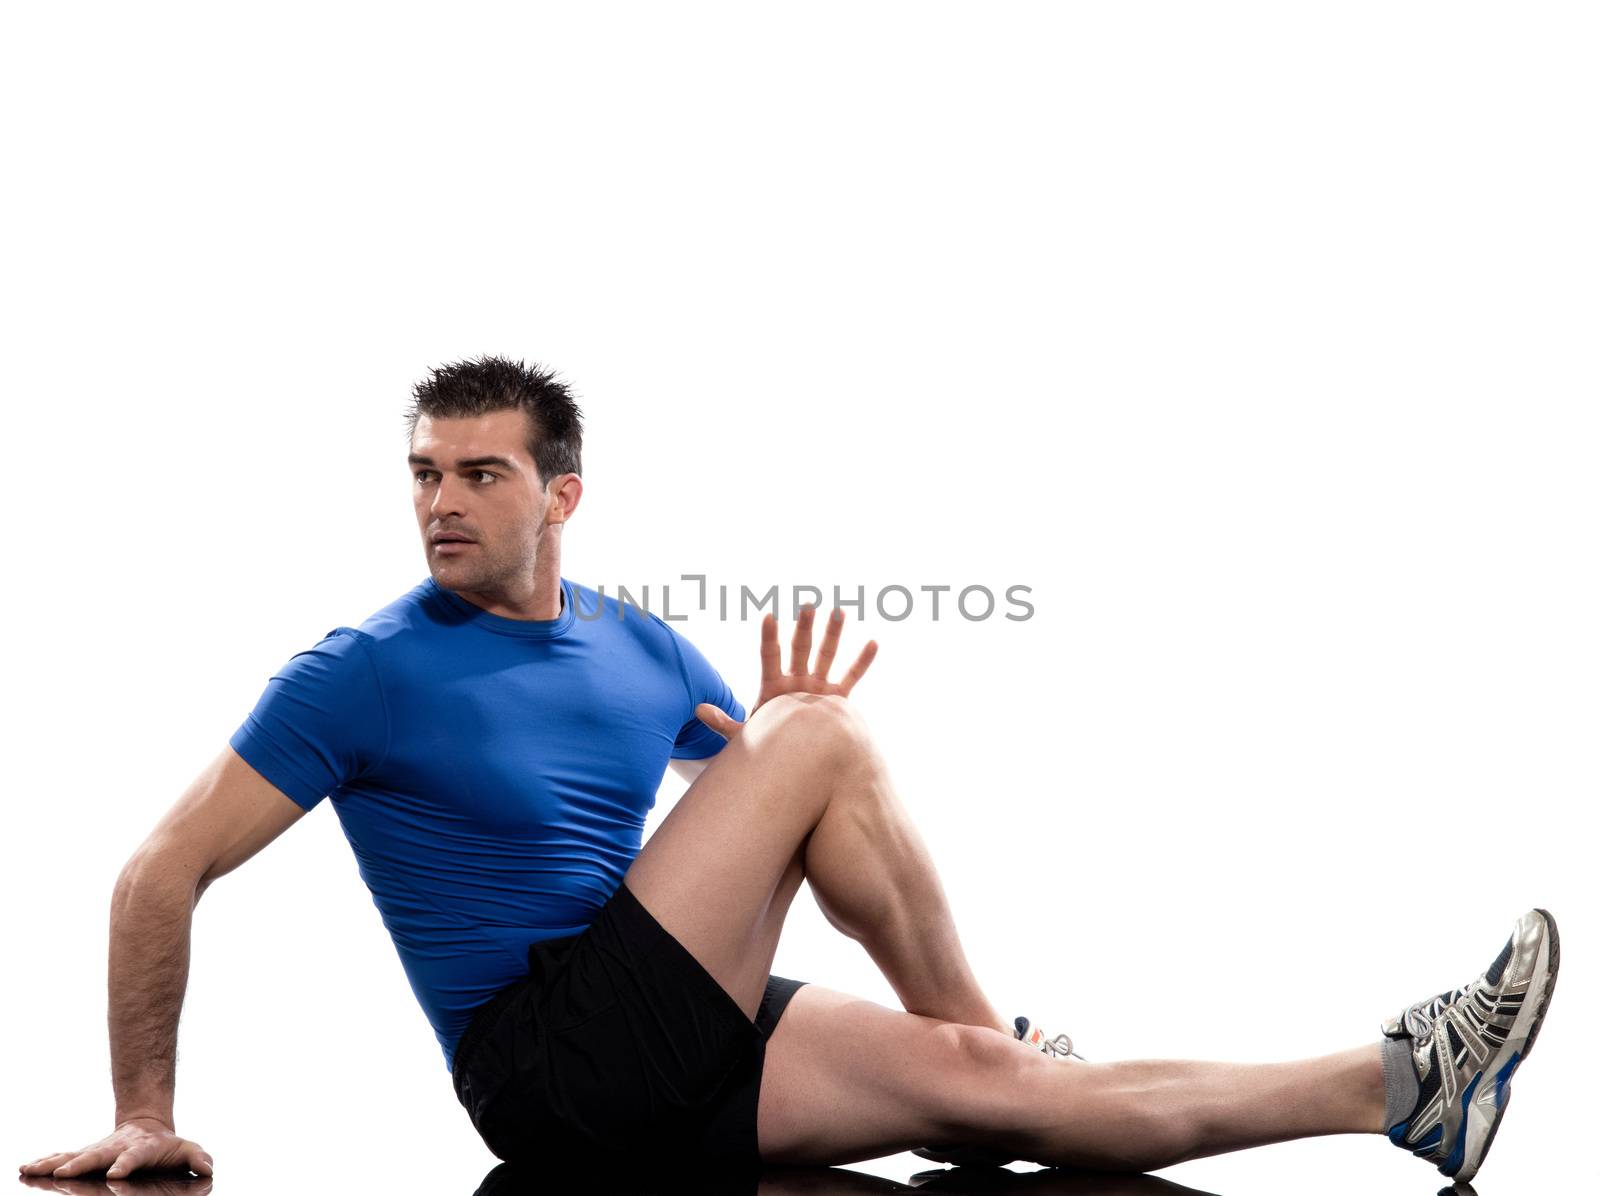 man on Abdominals rotation workout posture on white background.
Sit up, straighten one leg and bend the other one. Hold the knee and bring it towards you for 10-20 seconds. Release and switch.